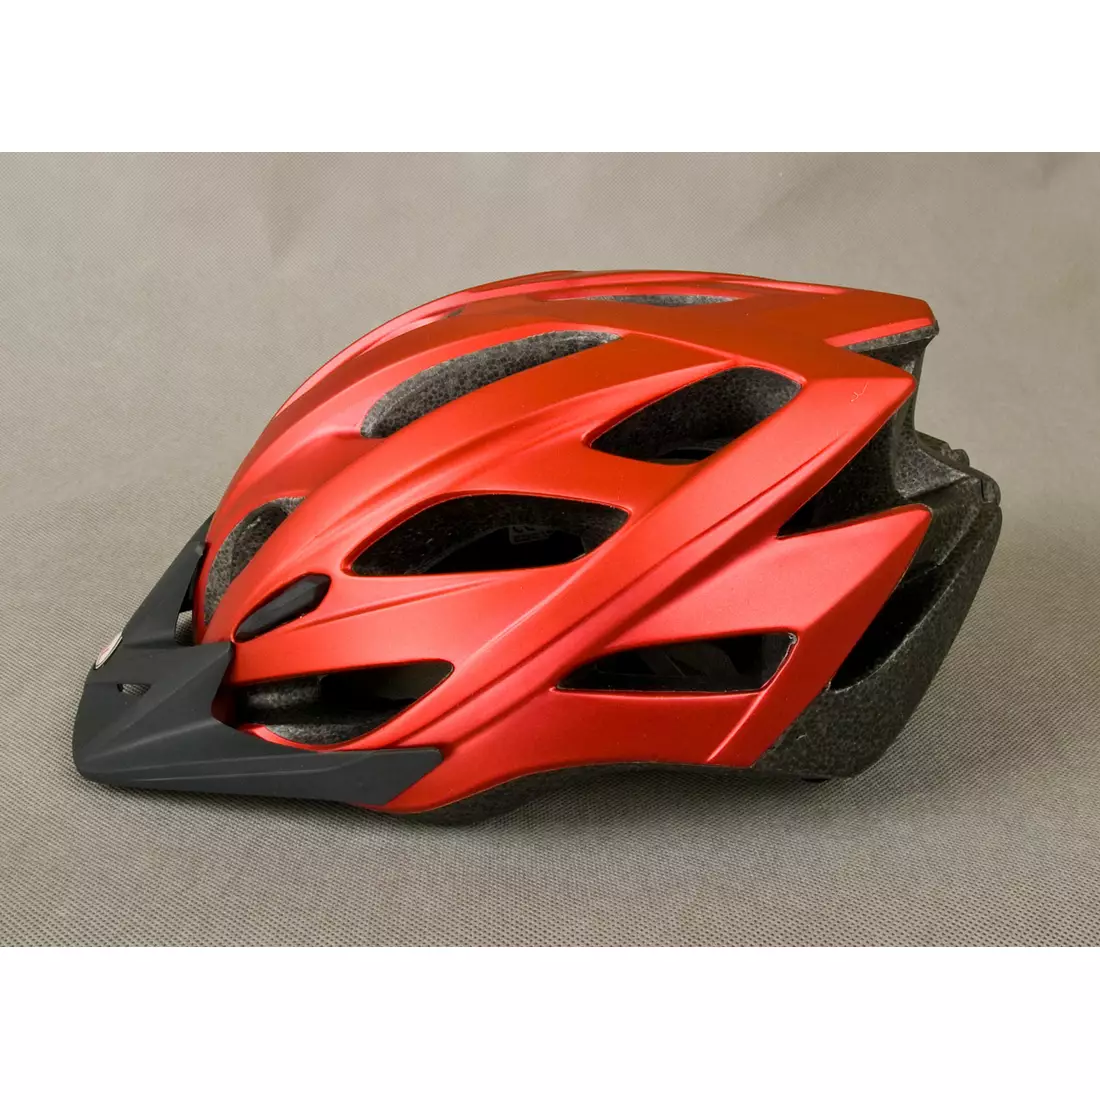 BELL kask rowerowy SLANT red mat